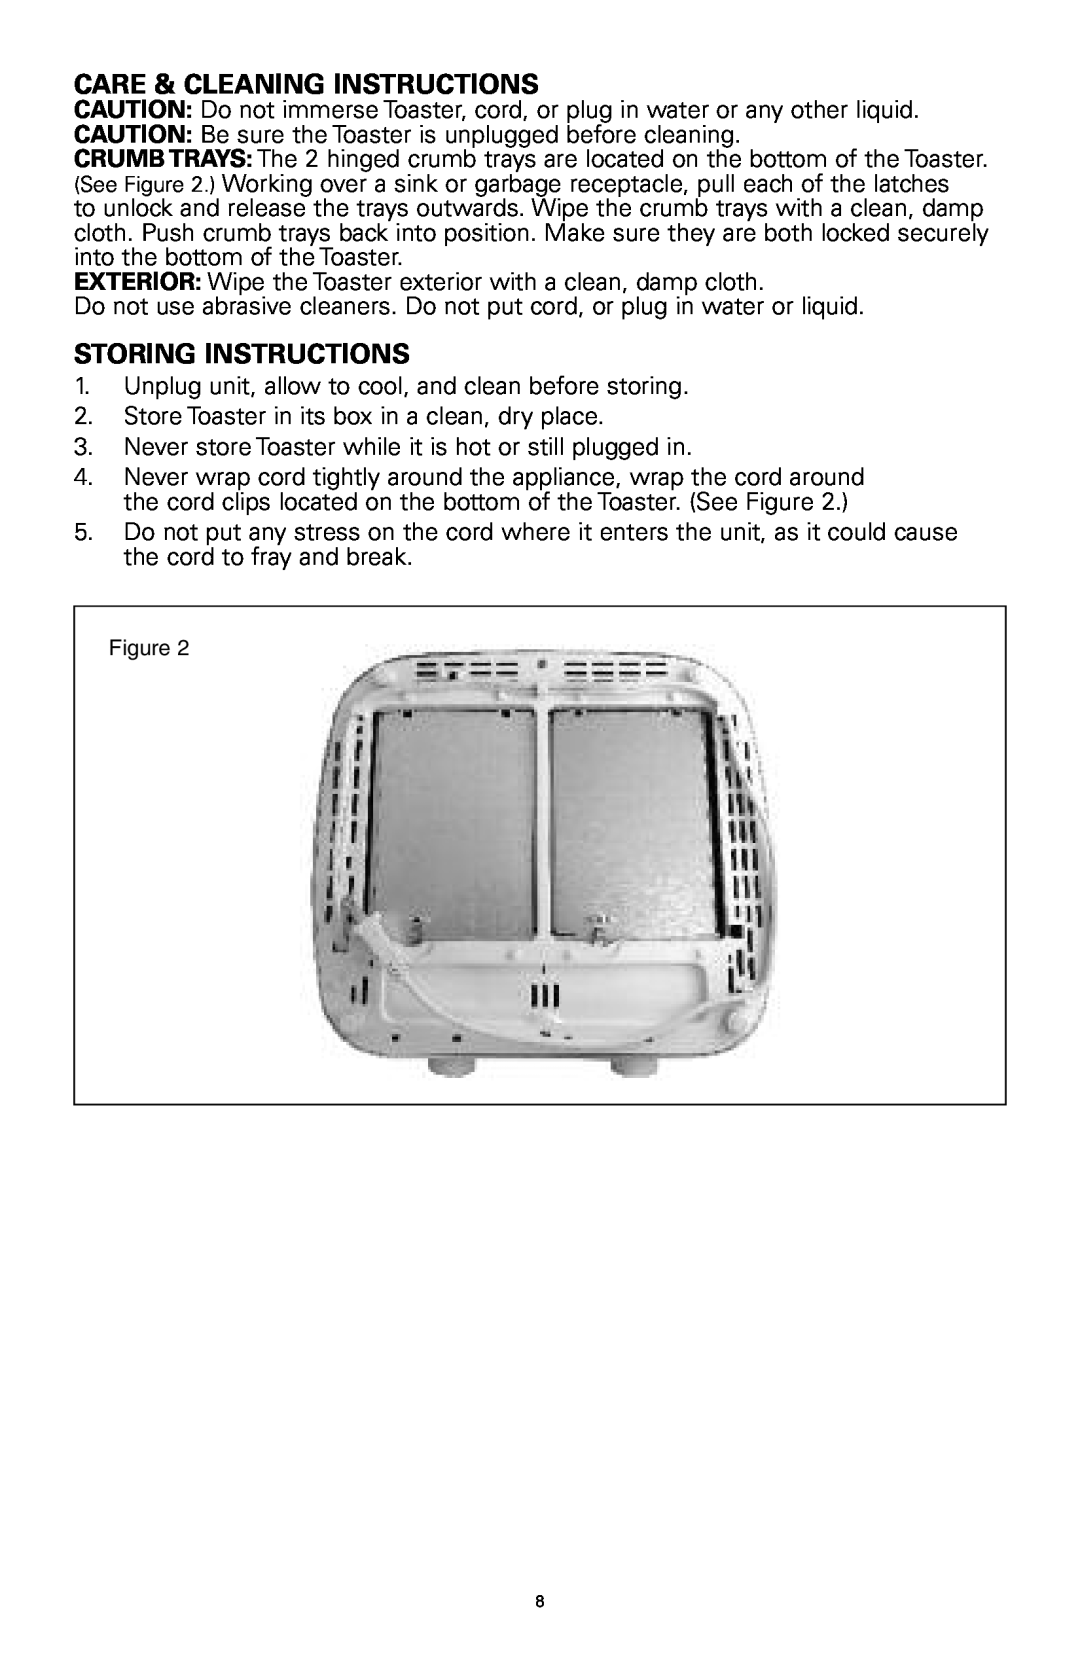 Rival 16042 manual Care & Cleaning Instructions, Storing Instructions 